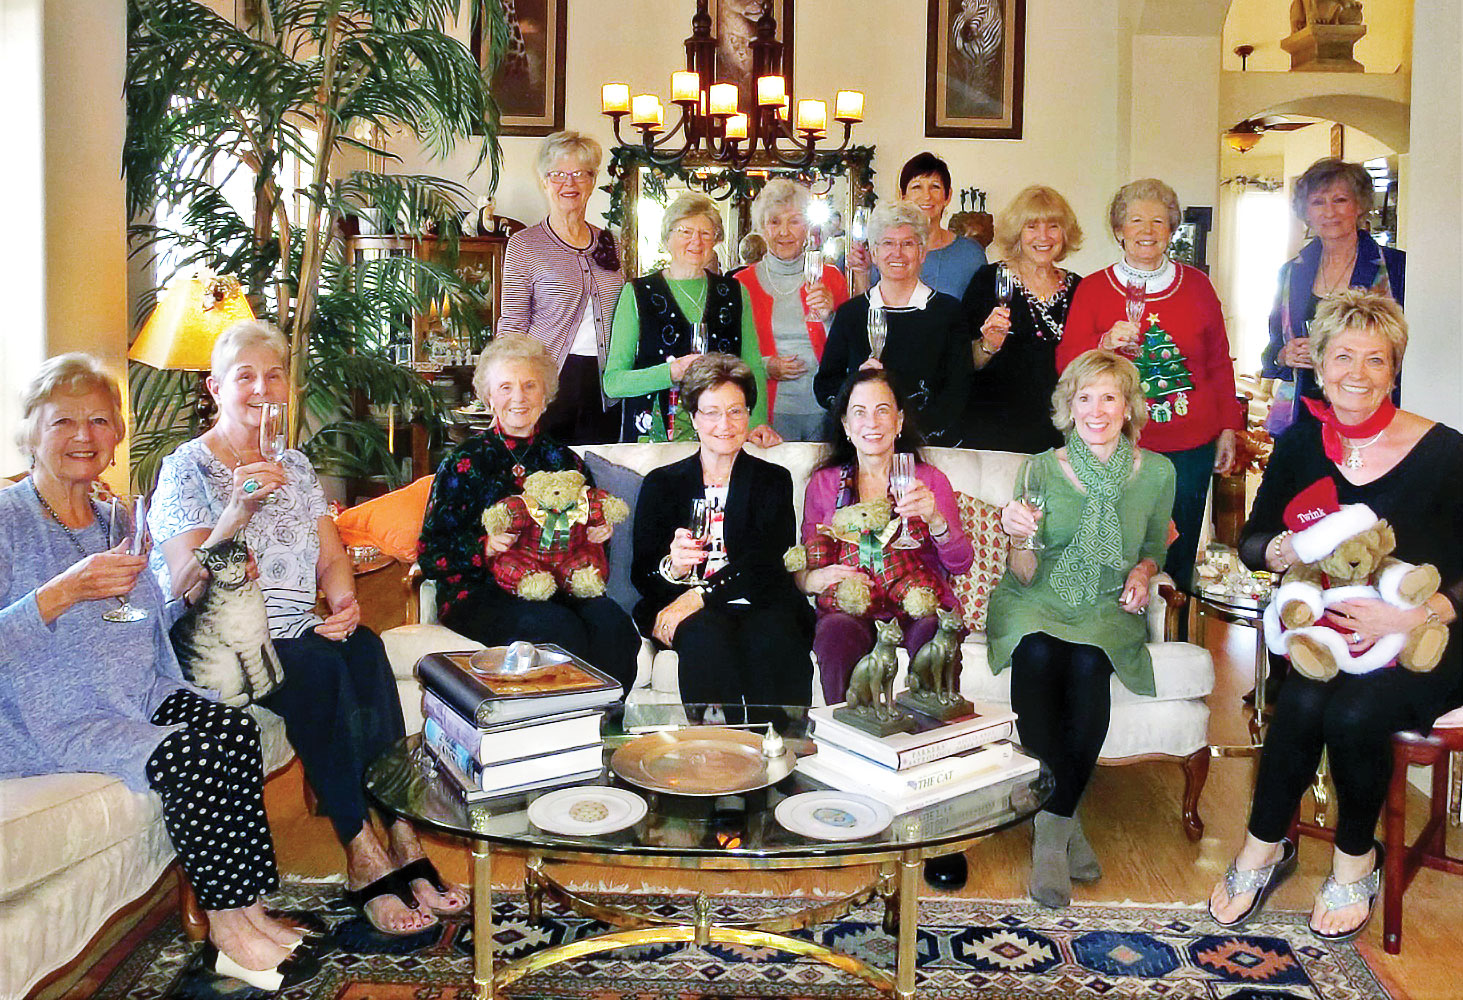 Seventeen ladies enjoyed a holiday coffee morning at the home of Twink Gates-Zimdar.